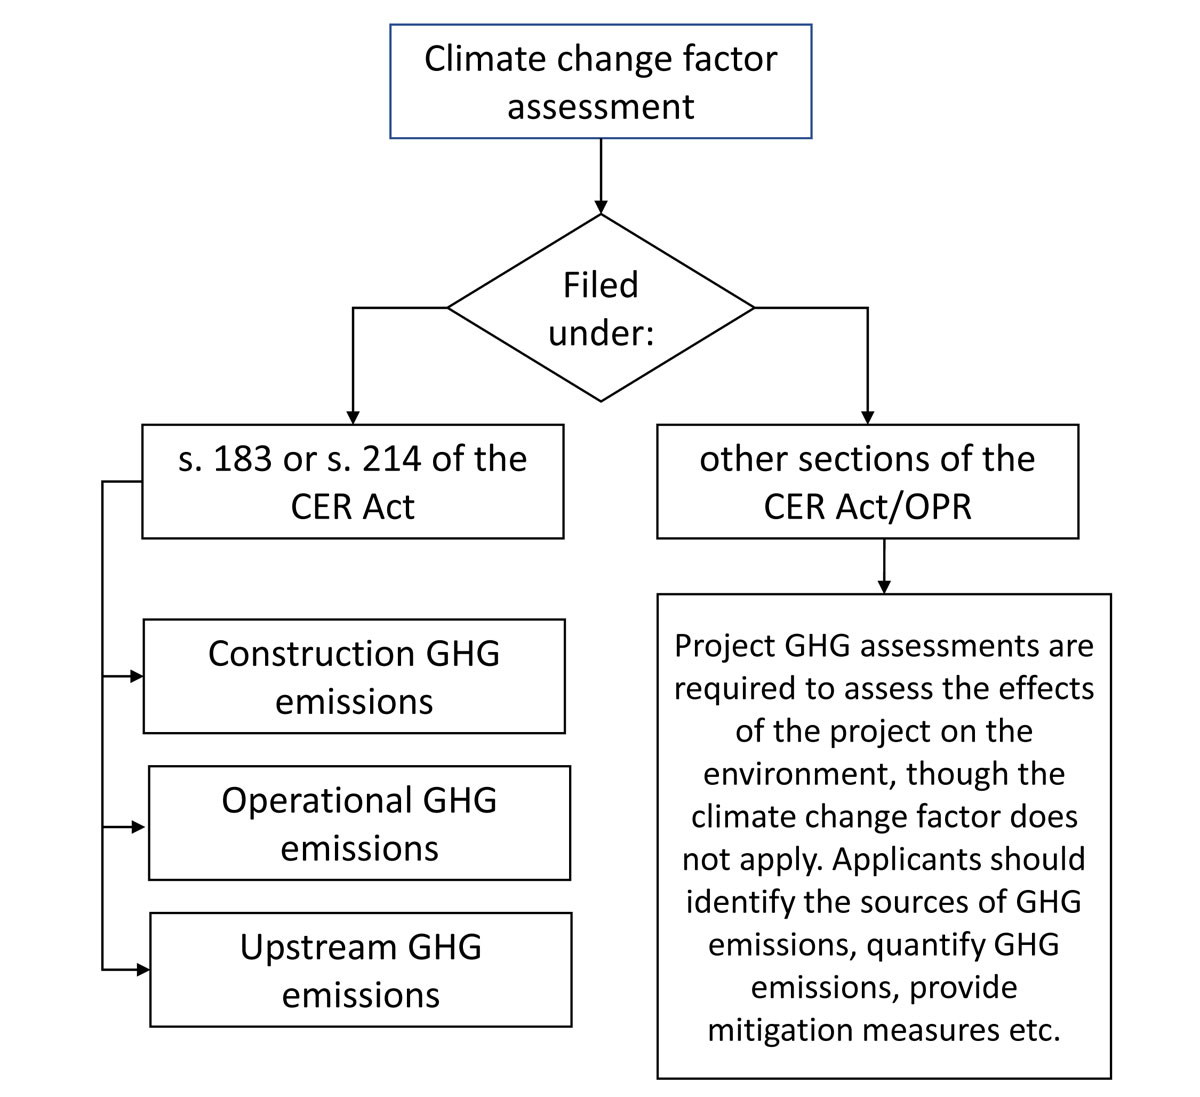 Figure A2-2: Scalable approach to climate change factor assessment